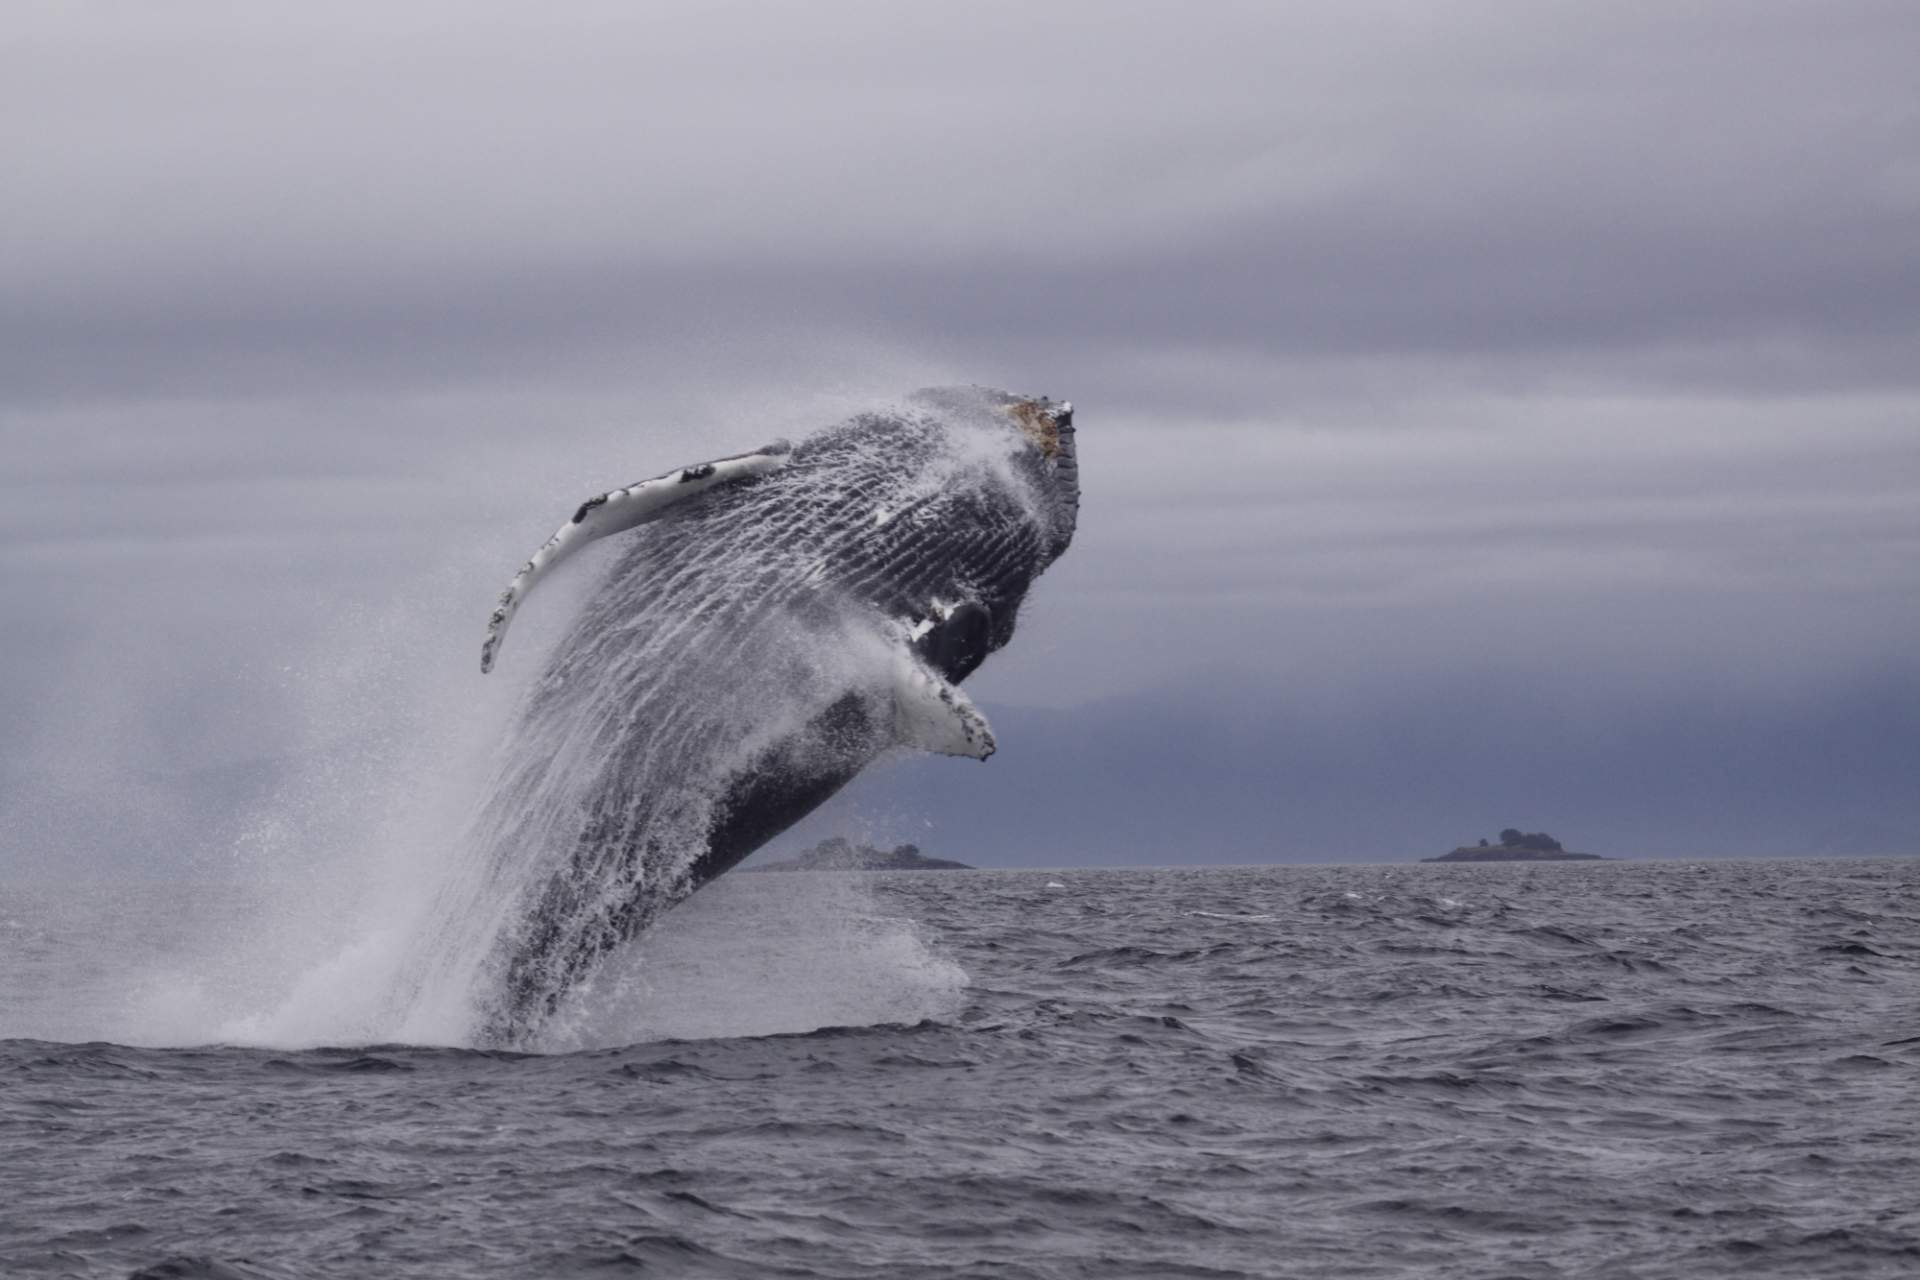 A humpback whale jumping out of the water